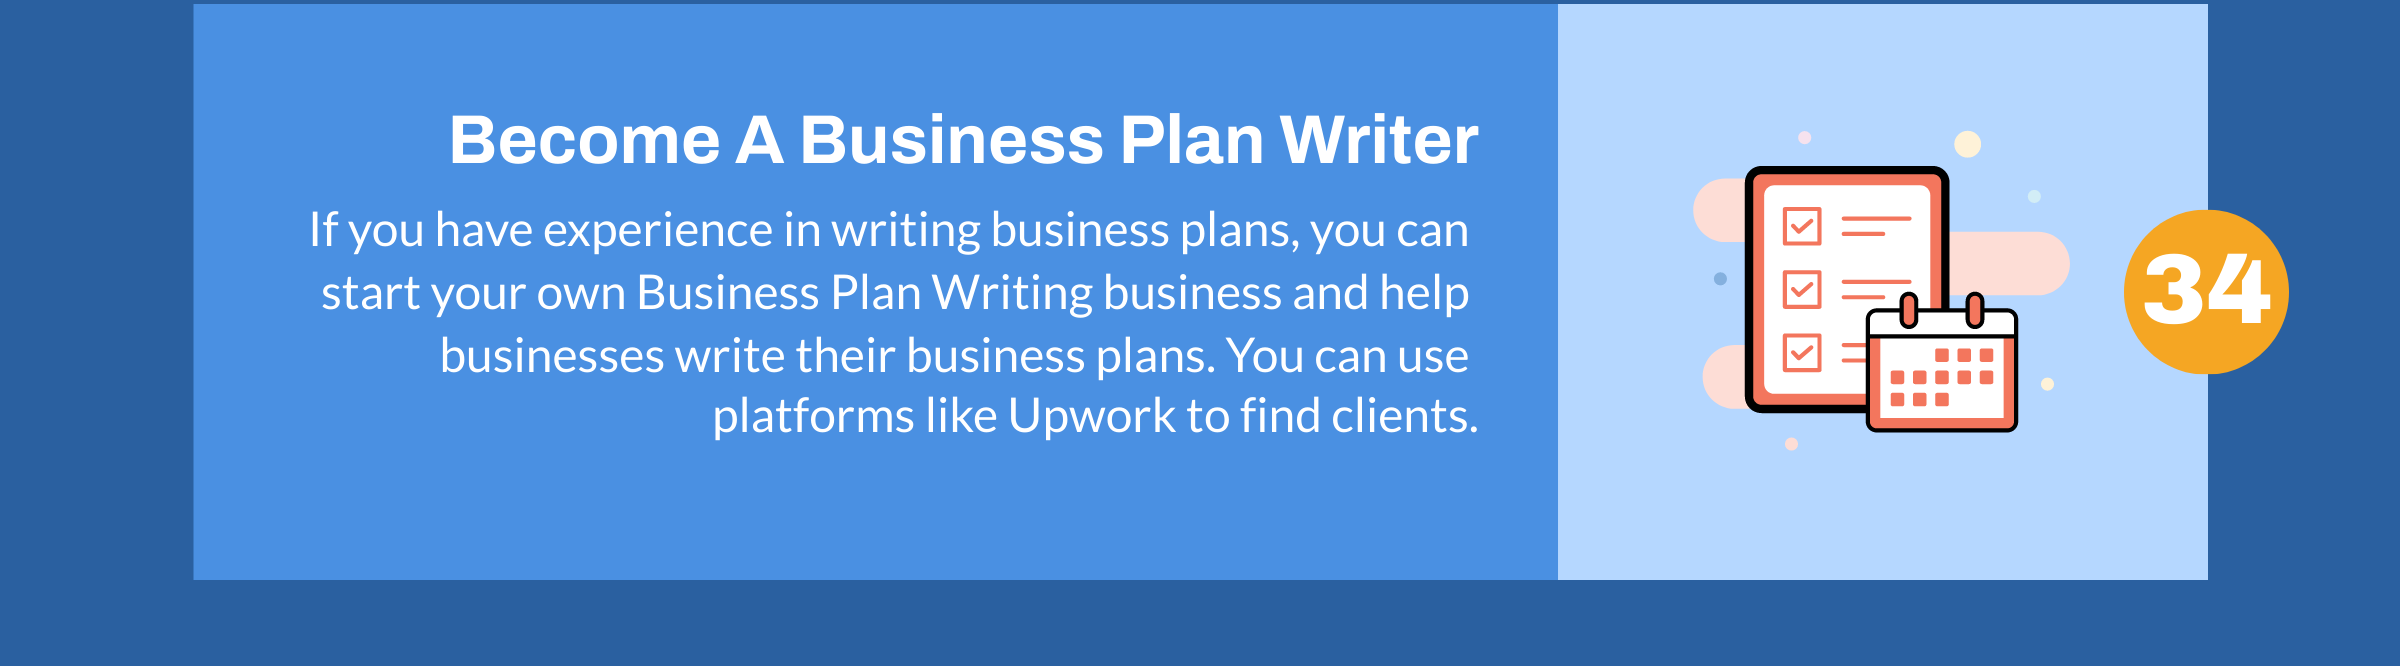 Become A Business Plan Writer